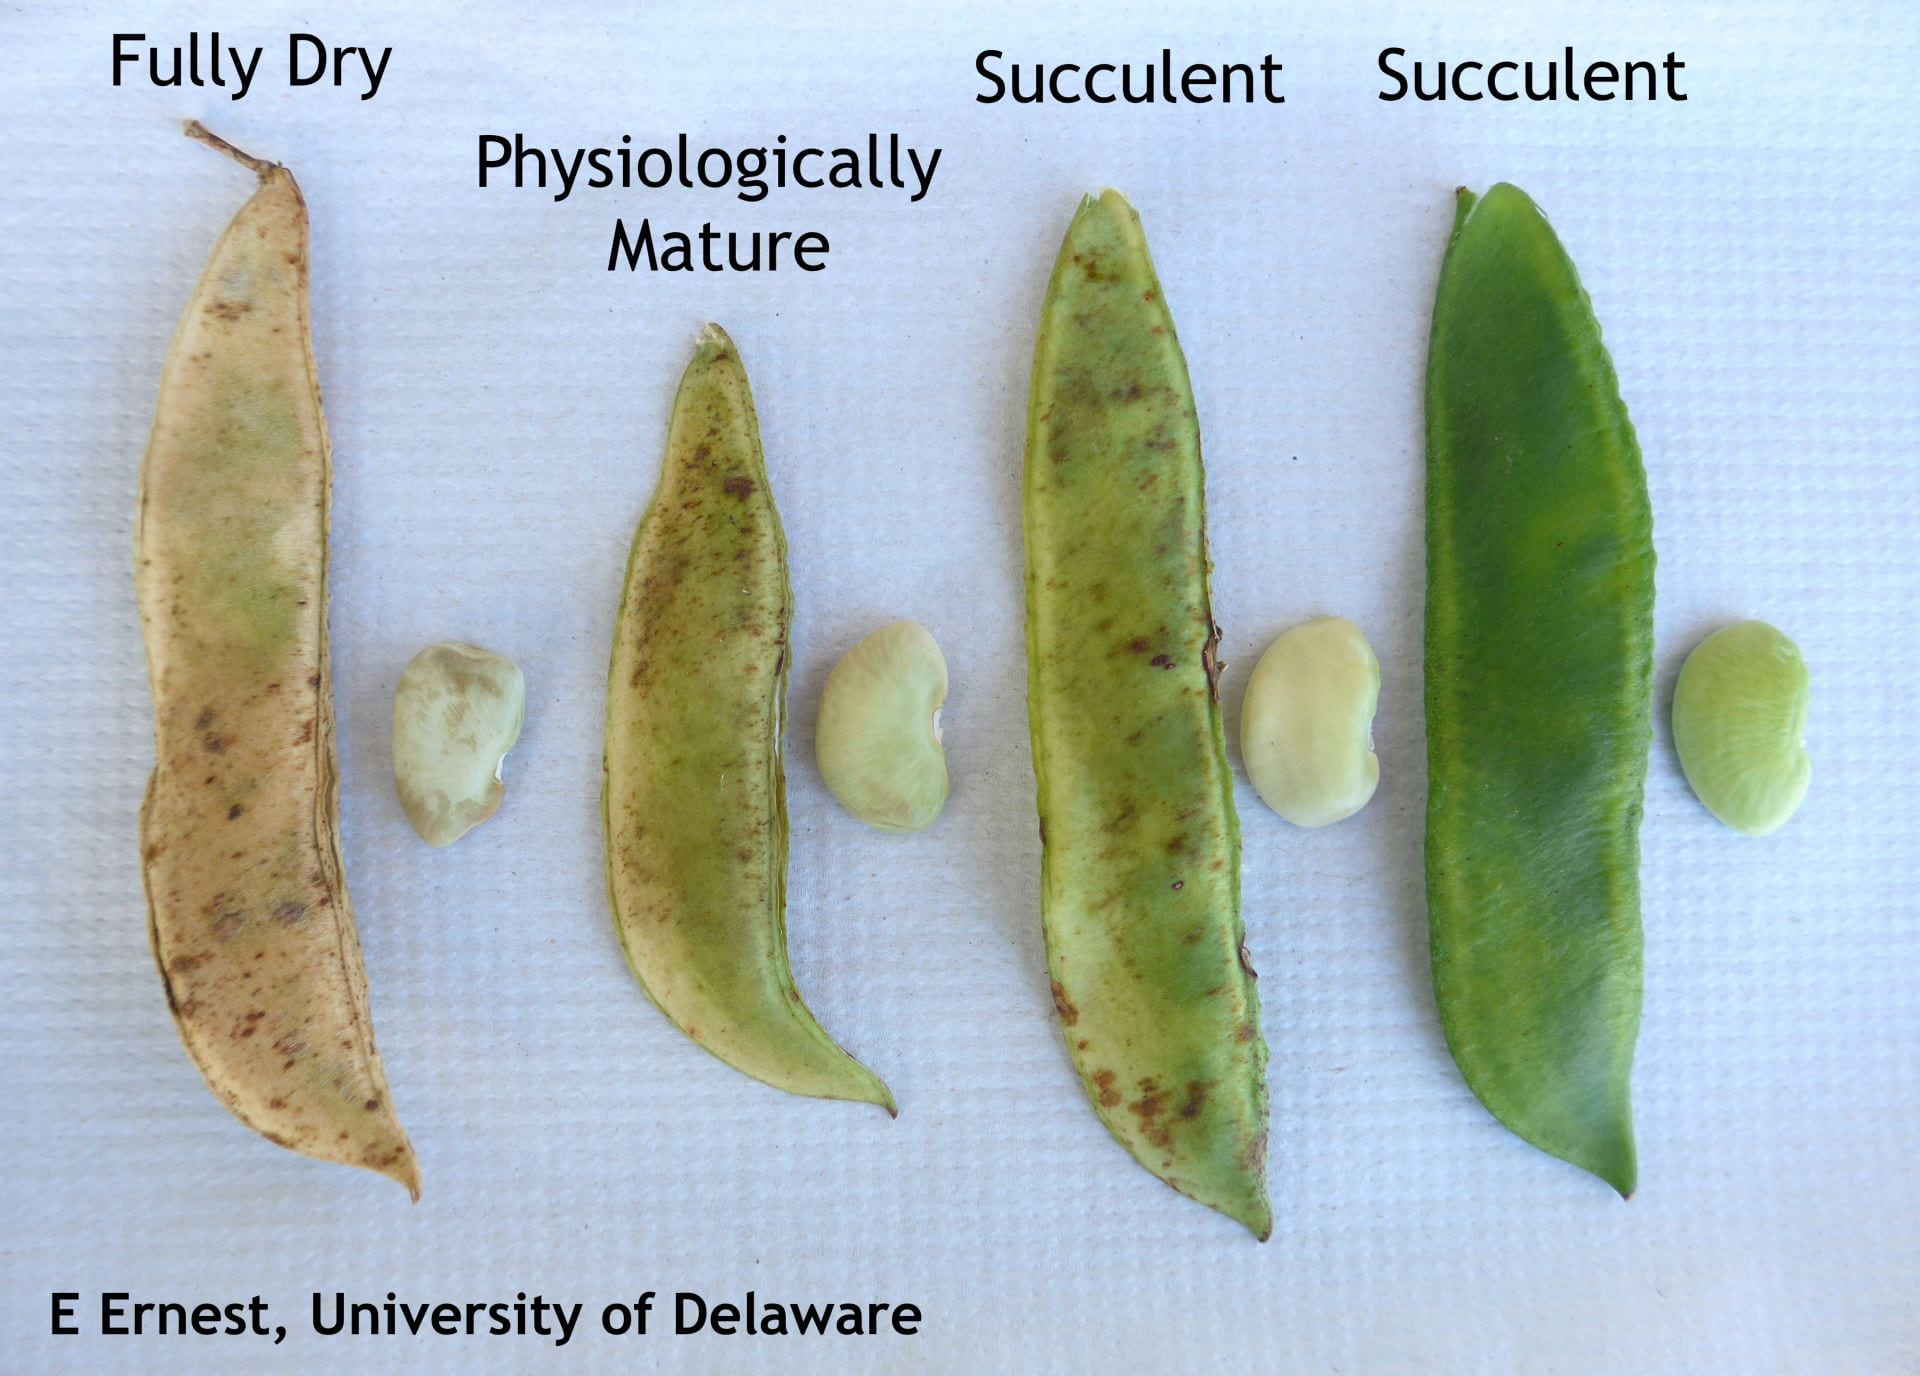 Figure 3. Physiologically mature pods have a papery, rather than succulent feel. Seed may not be fully dry but can dried after shelling. The pods pictured here are from a University of Delaware experimental variety which has subtle red seed coat pigmentation. The red coloration is not visible in succulent seed but becomes apparent as the seed matures.